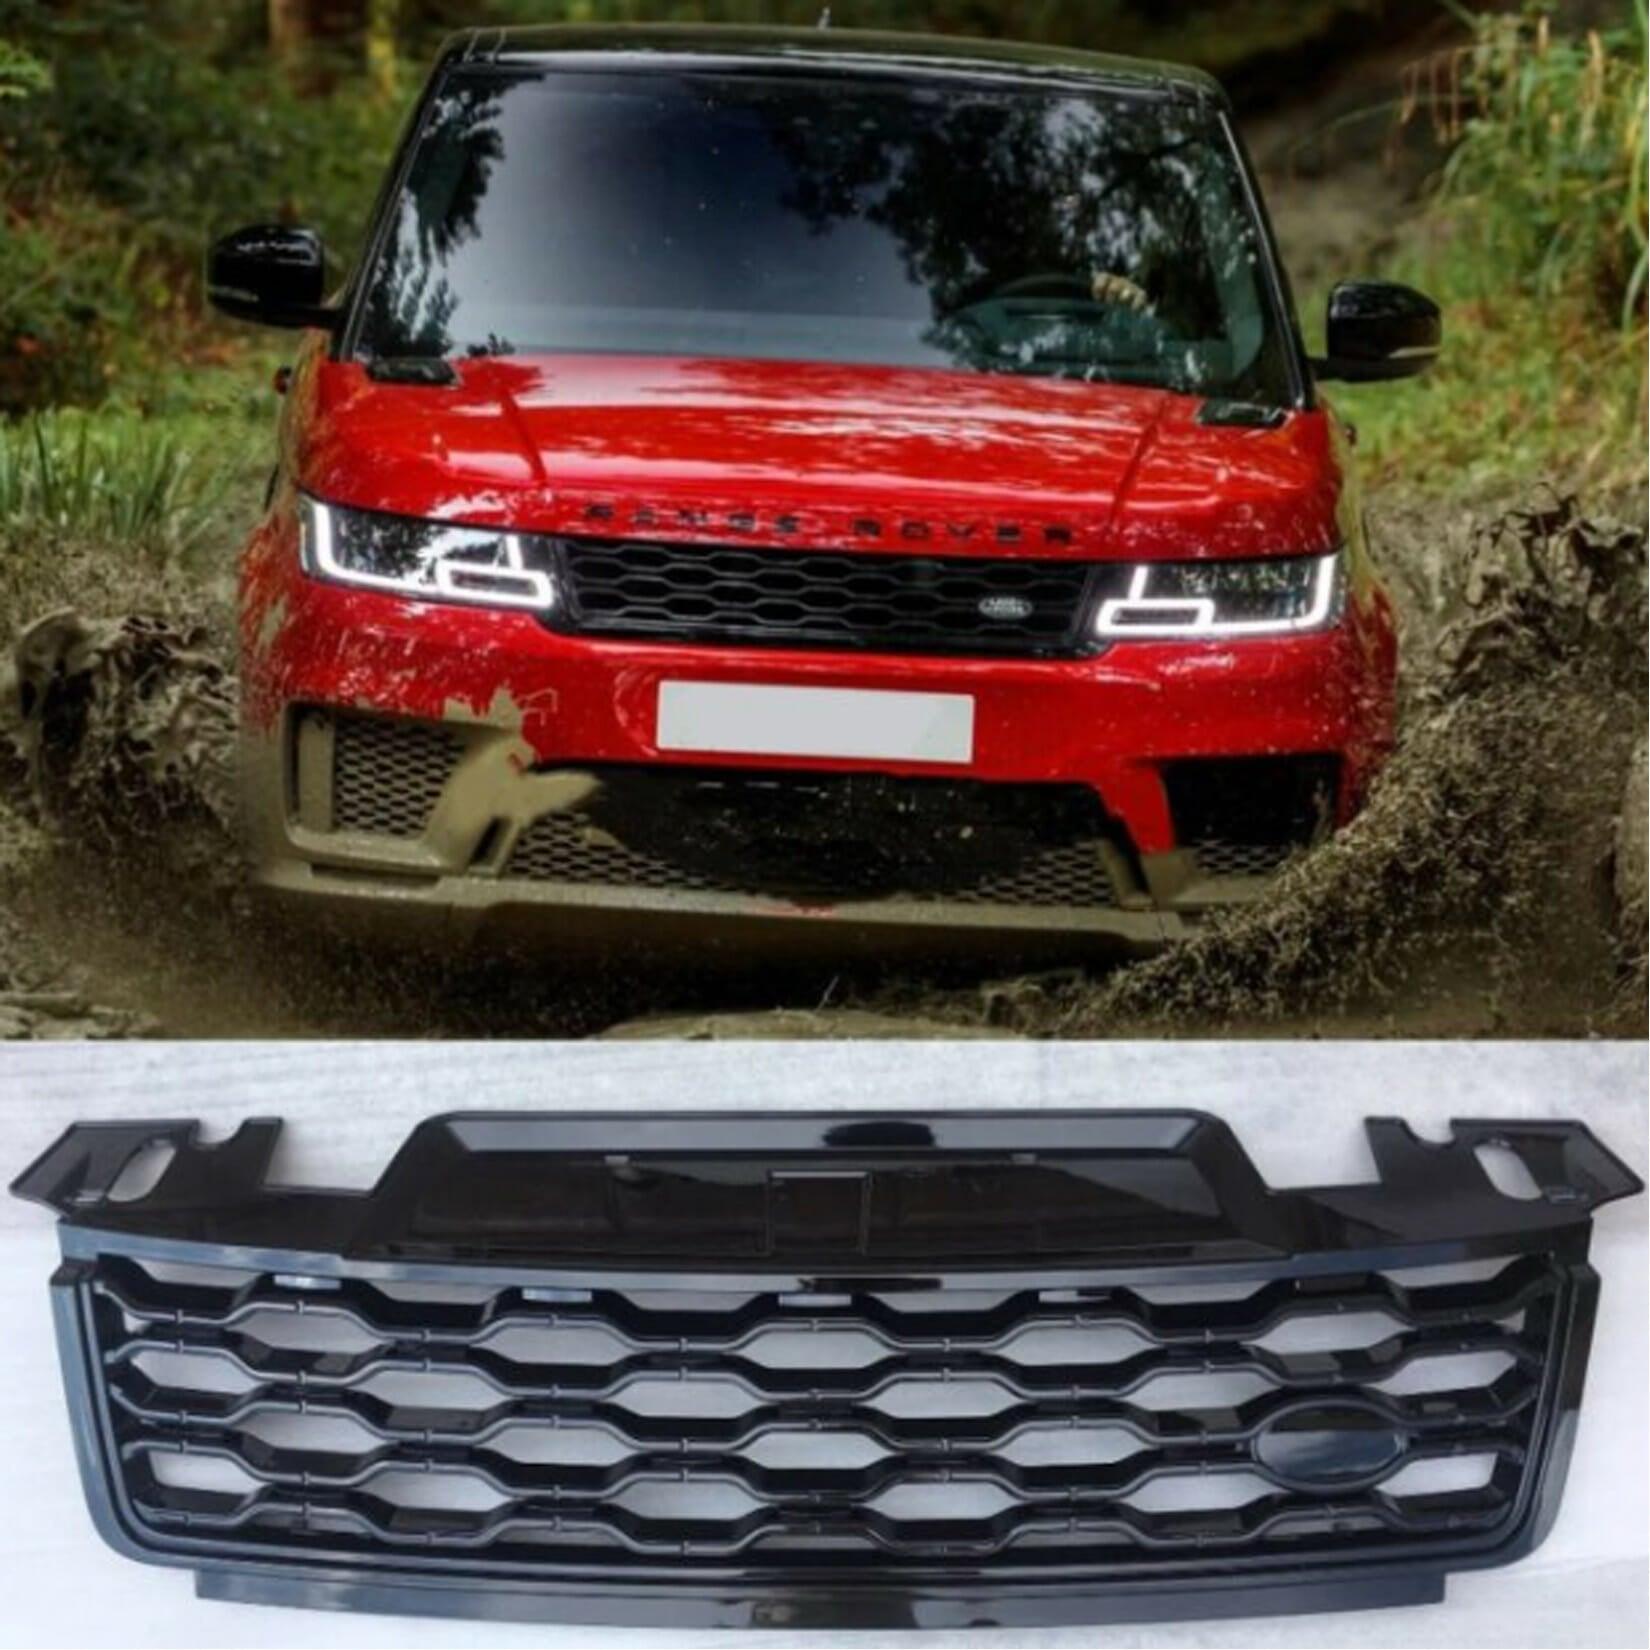 RANGE ROVER SPORT 2018-2022- L494 - GRILLE, SIDE VENTS AND ACCESSORIES - Storm Xccessories2